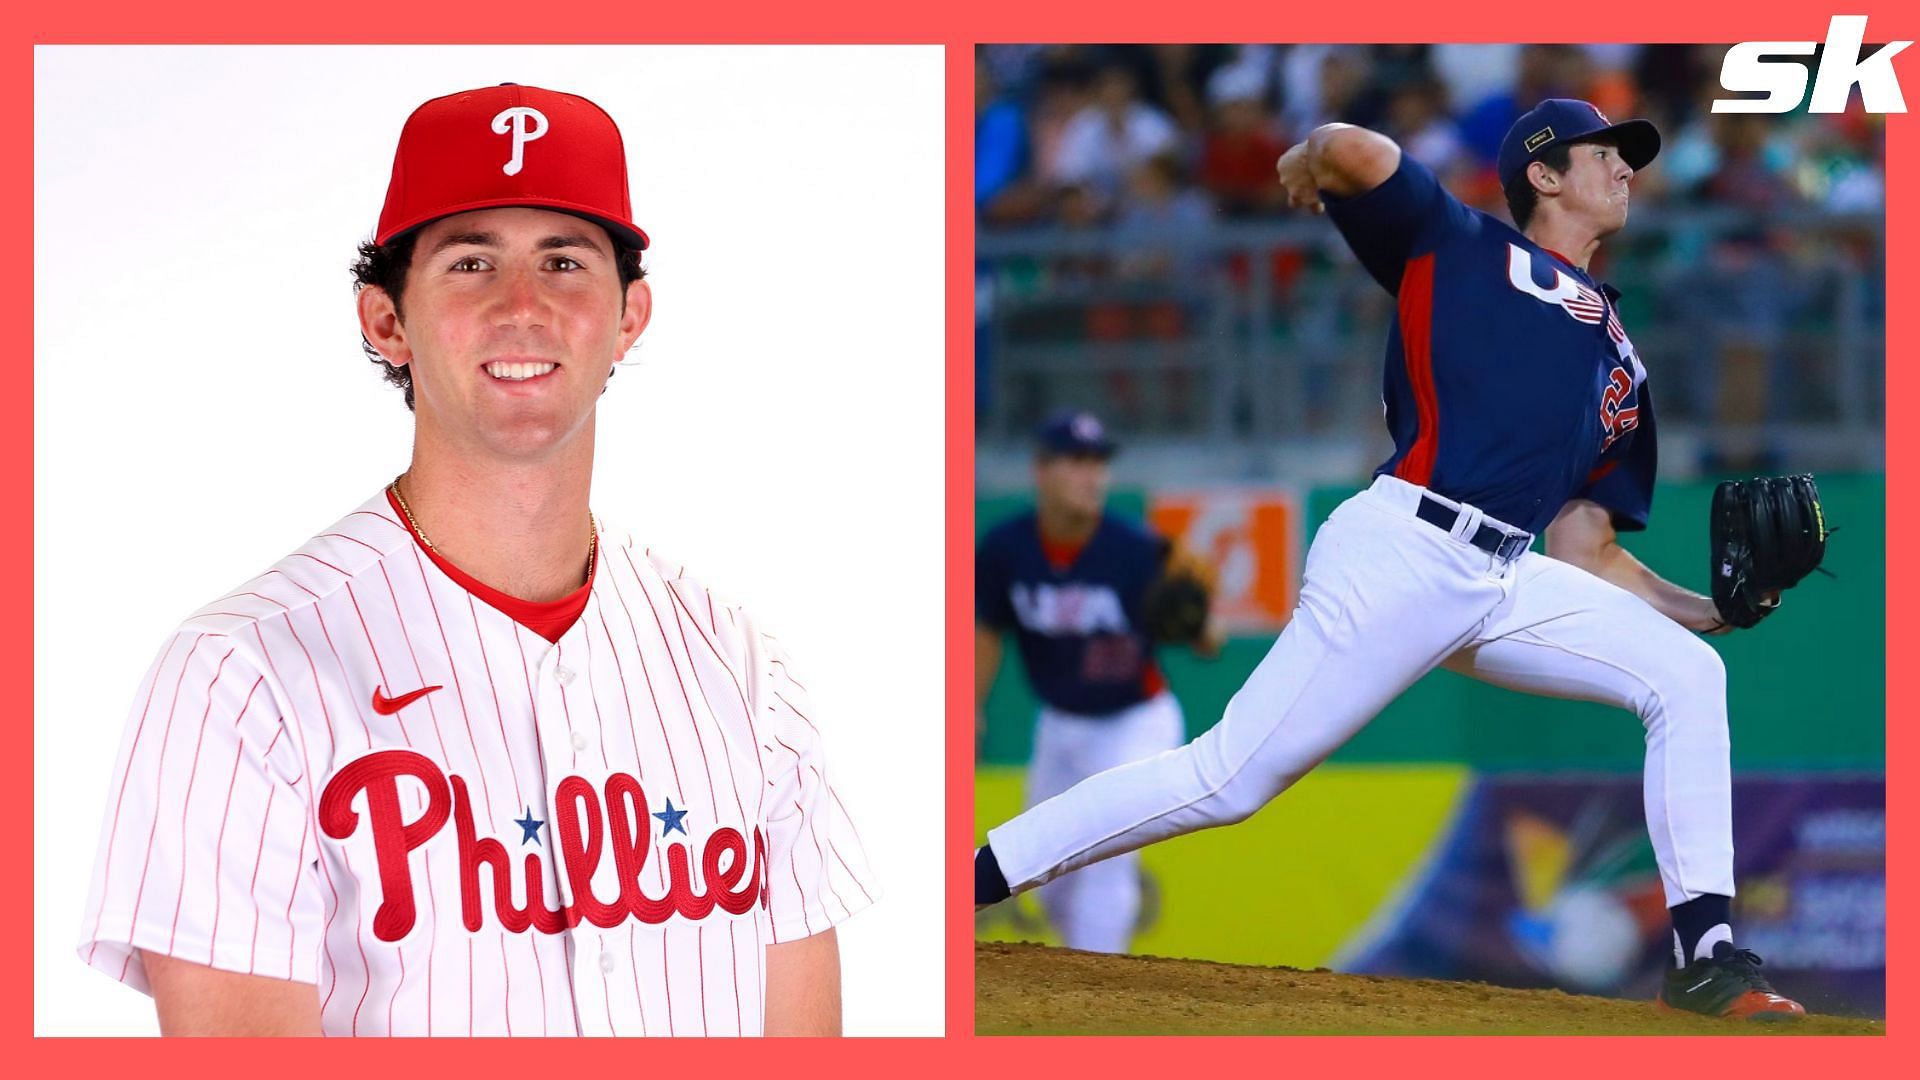 Phillies fans livid with management after top prospect Andrew Painter